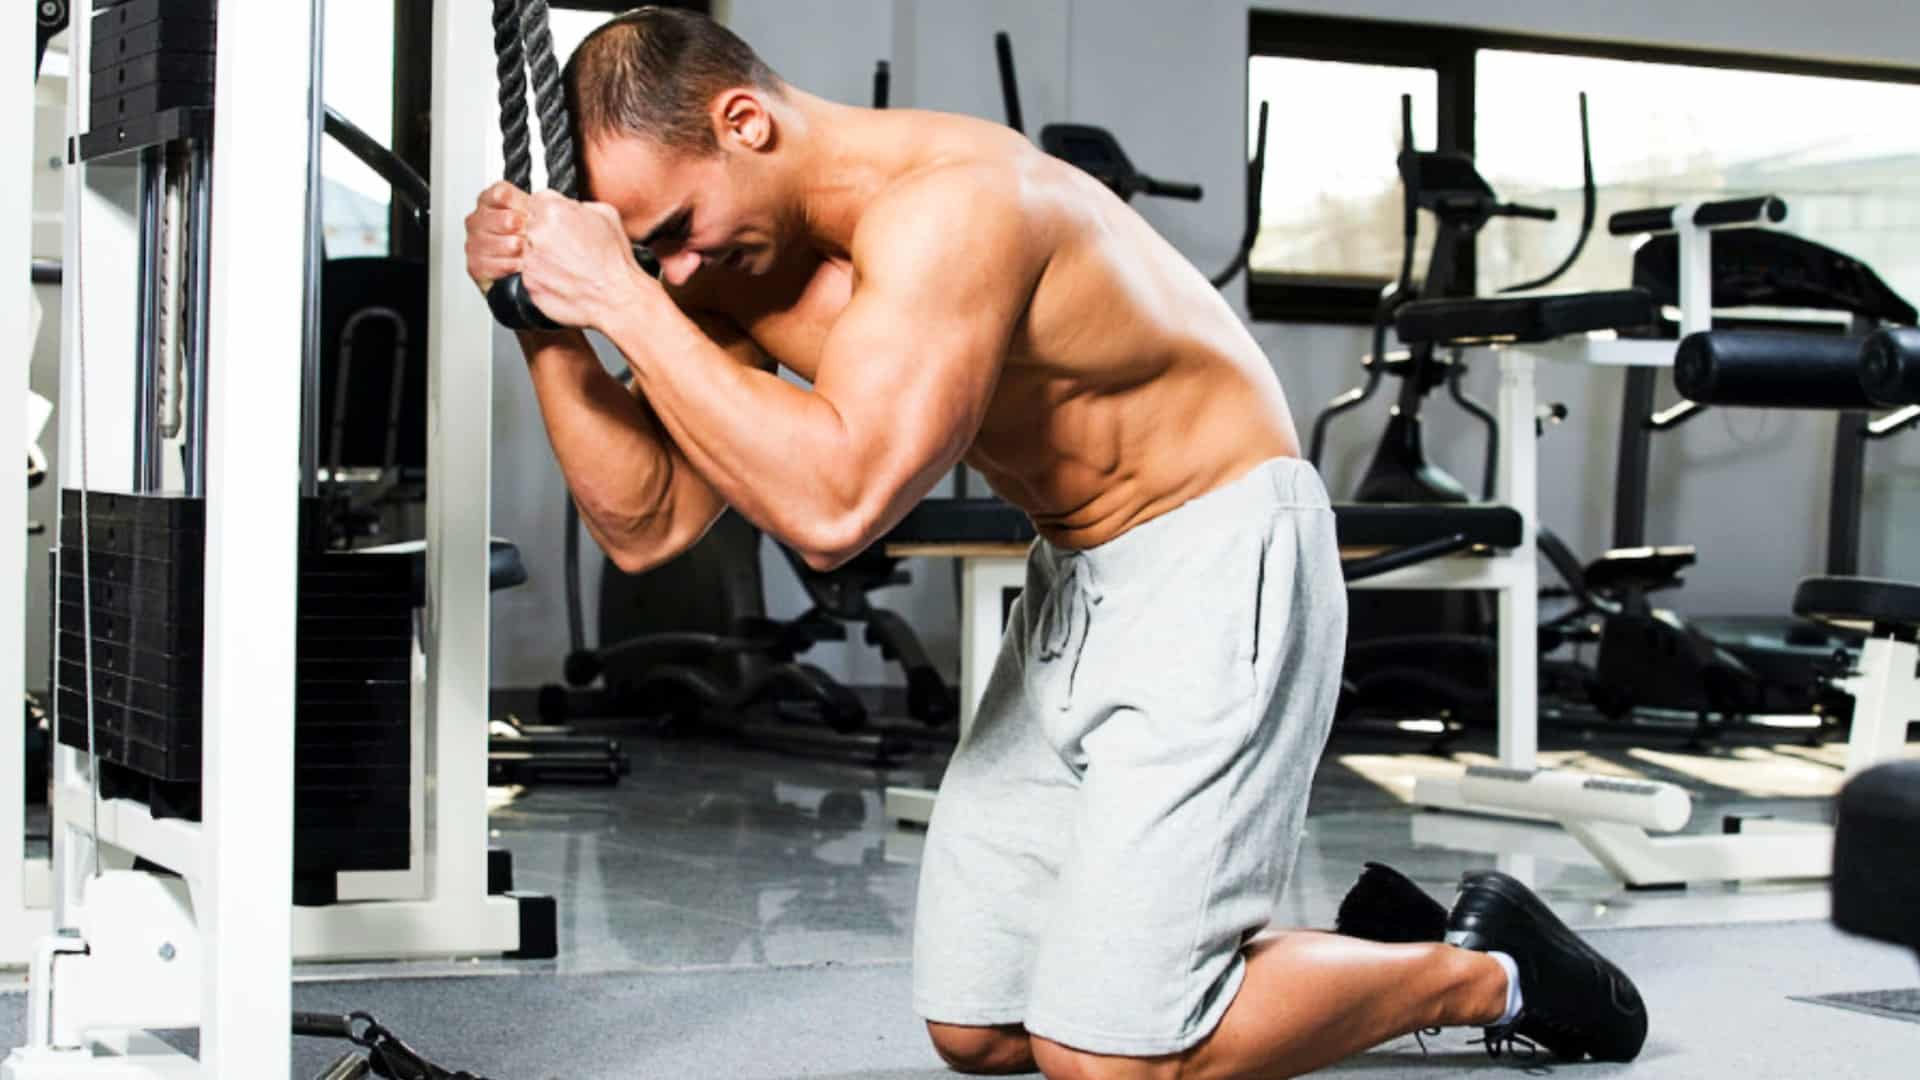 Best Cable Exercises For Abs and Core Strength